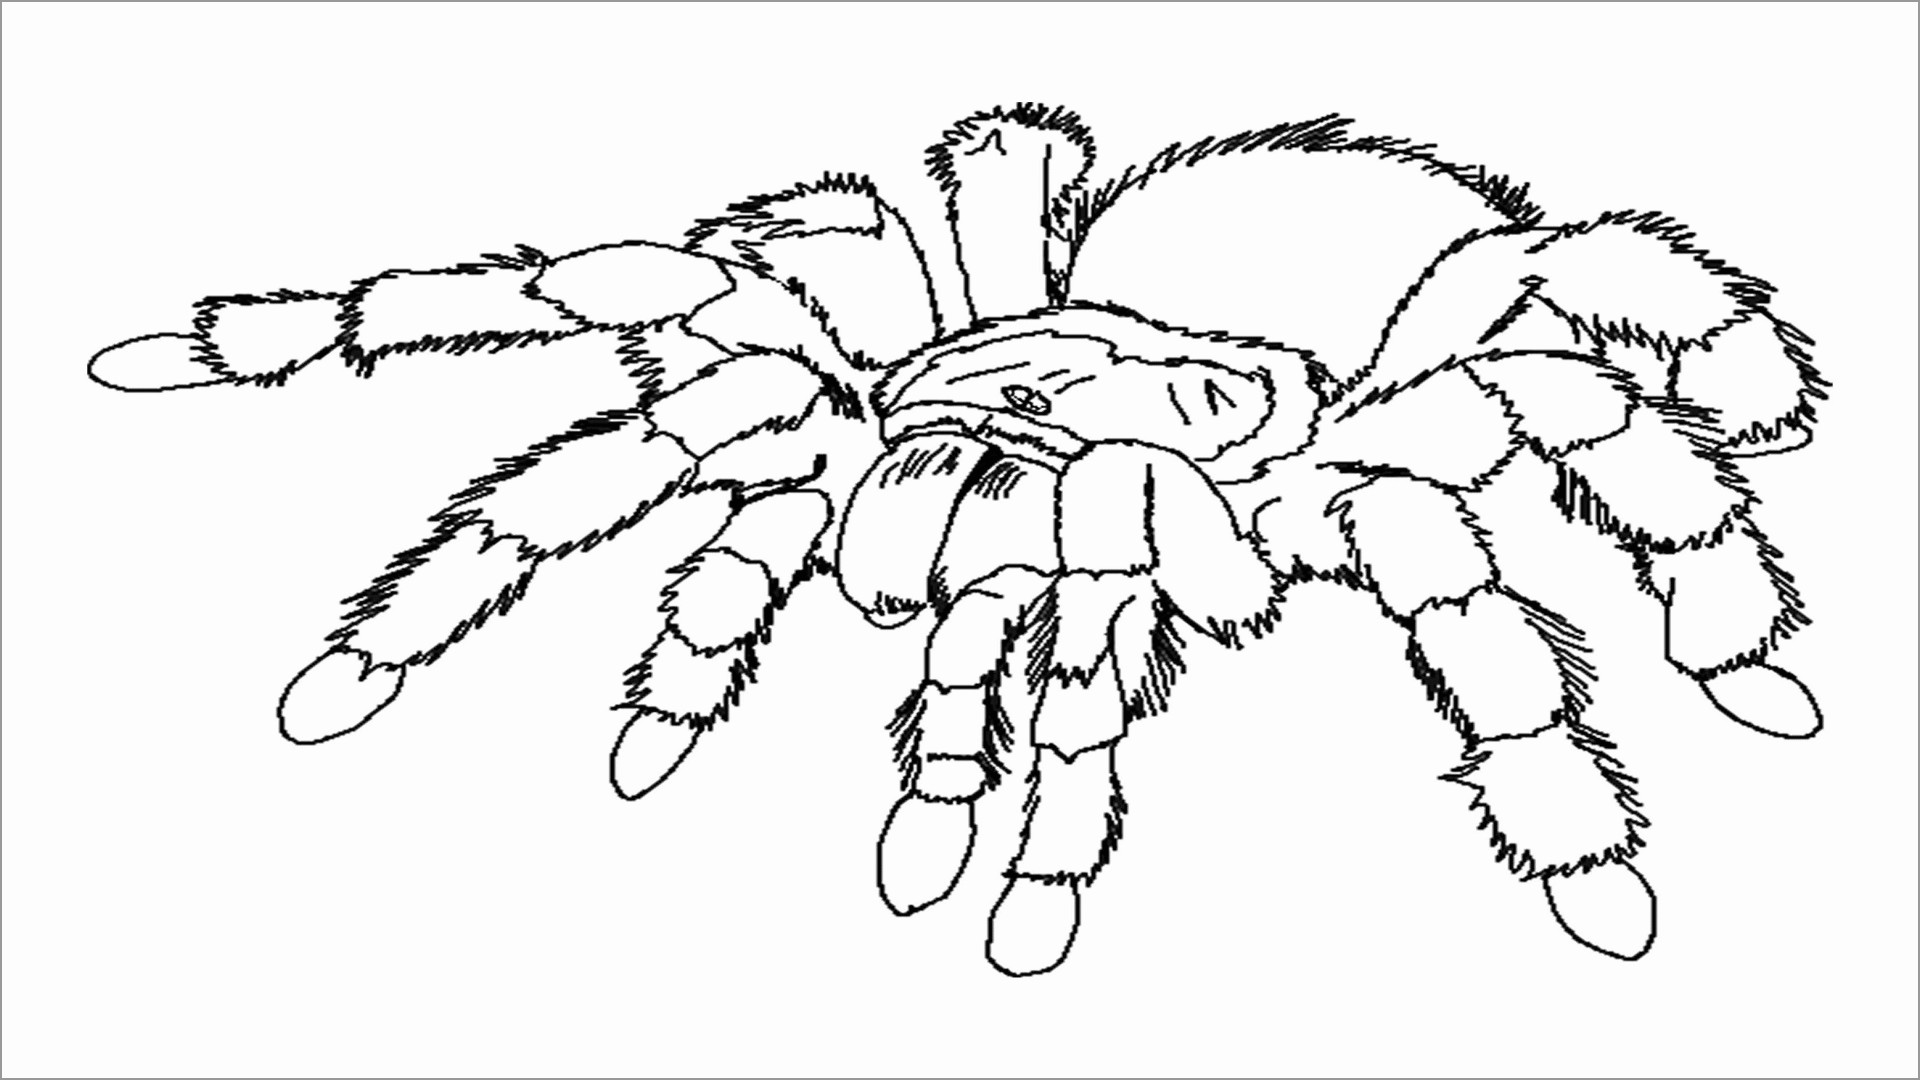 Realistic Spider Coloring Page